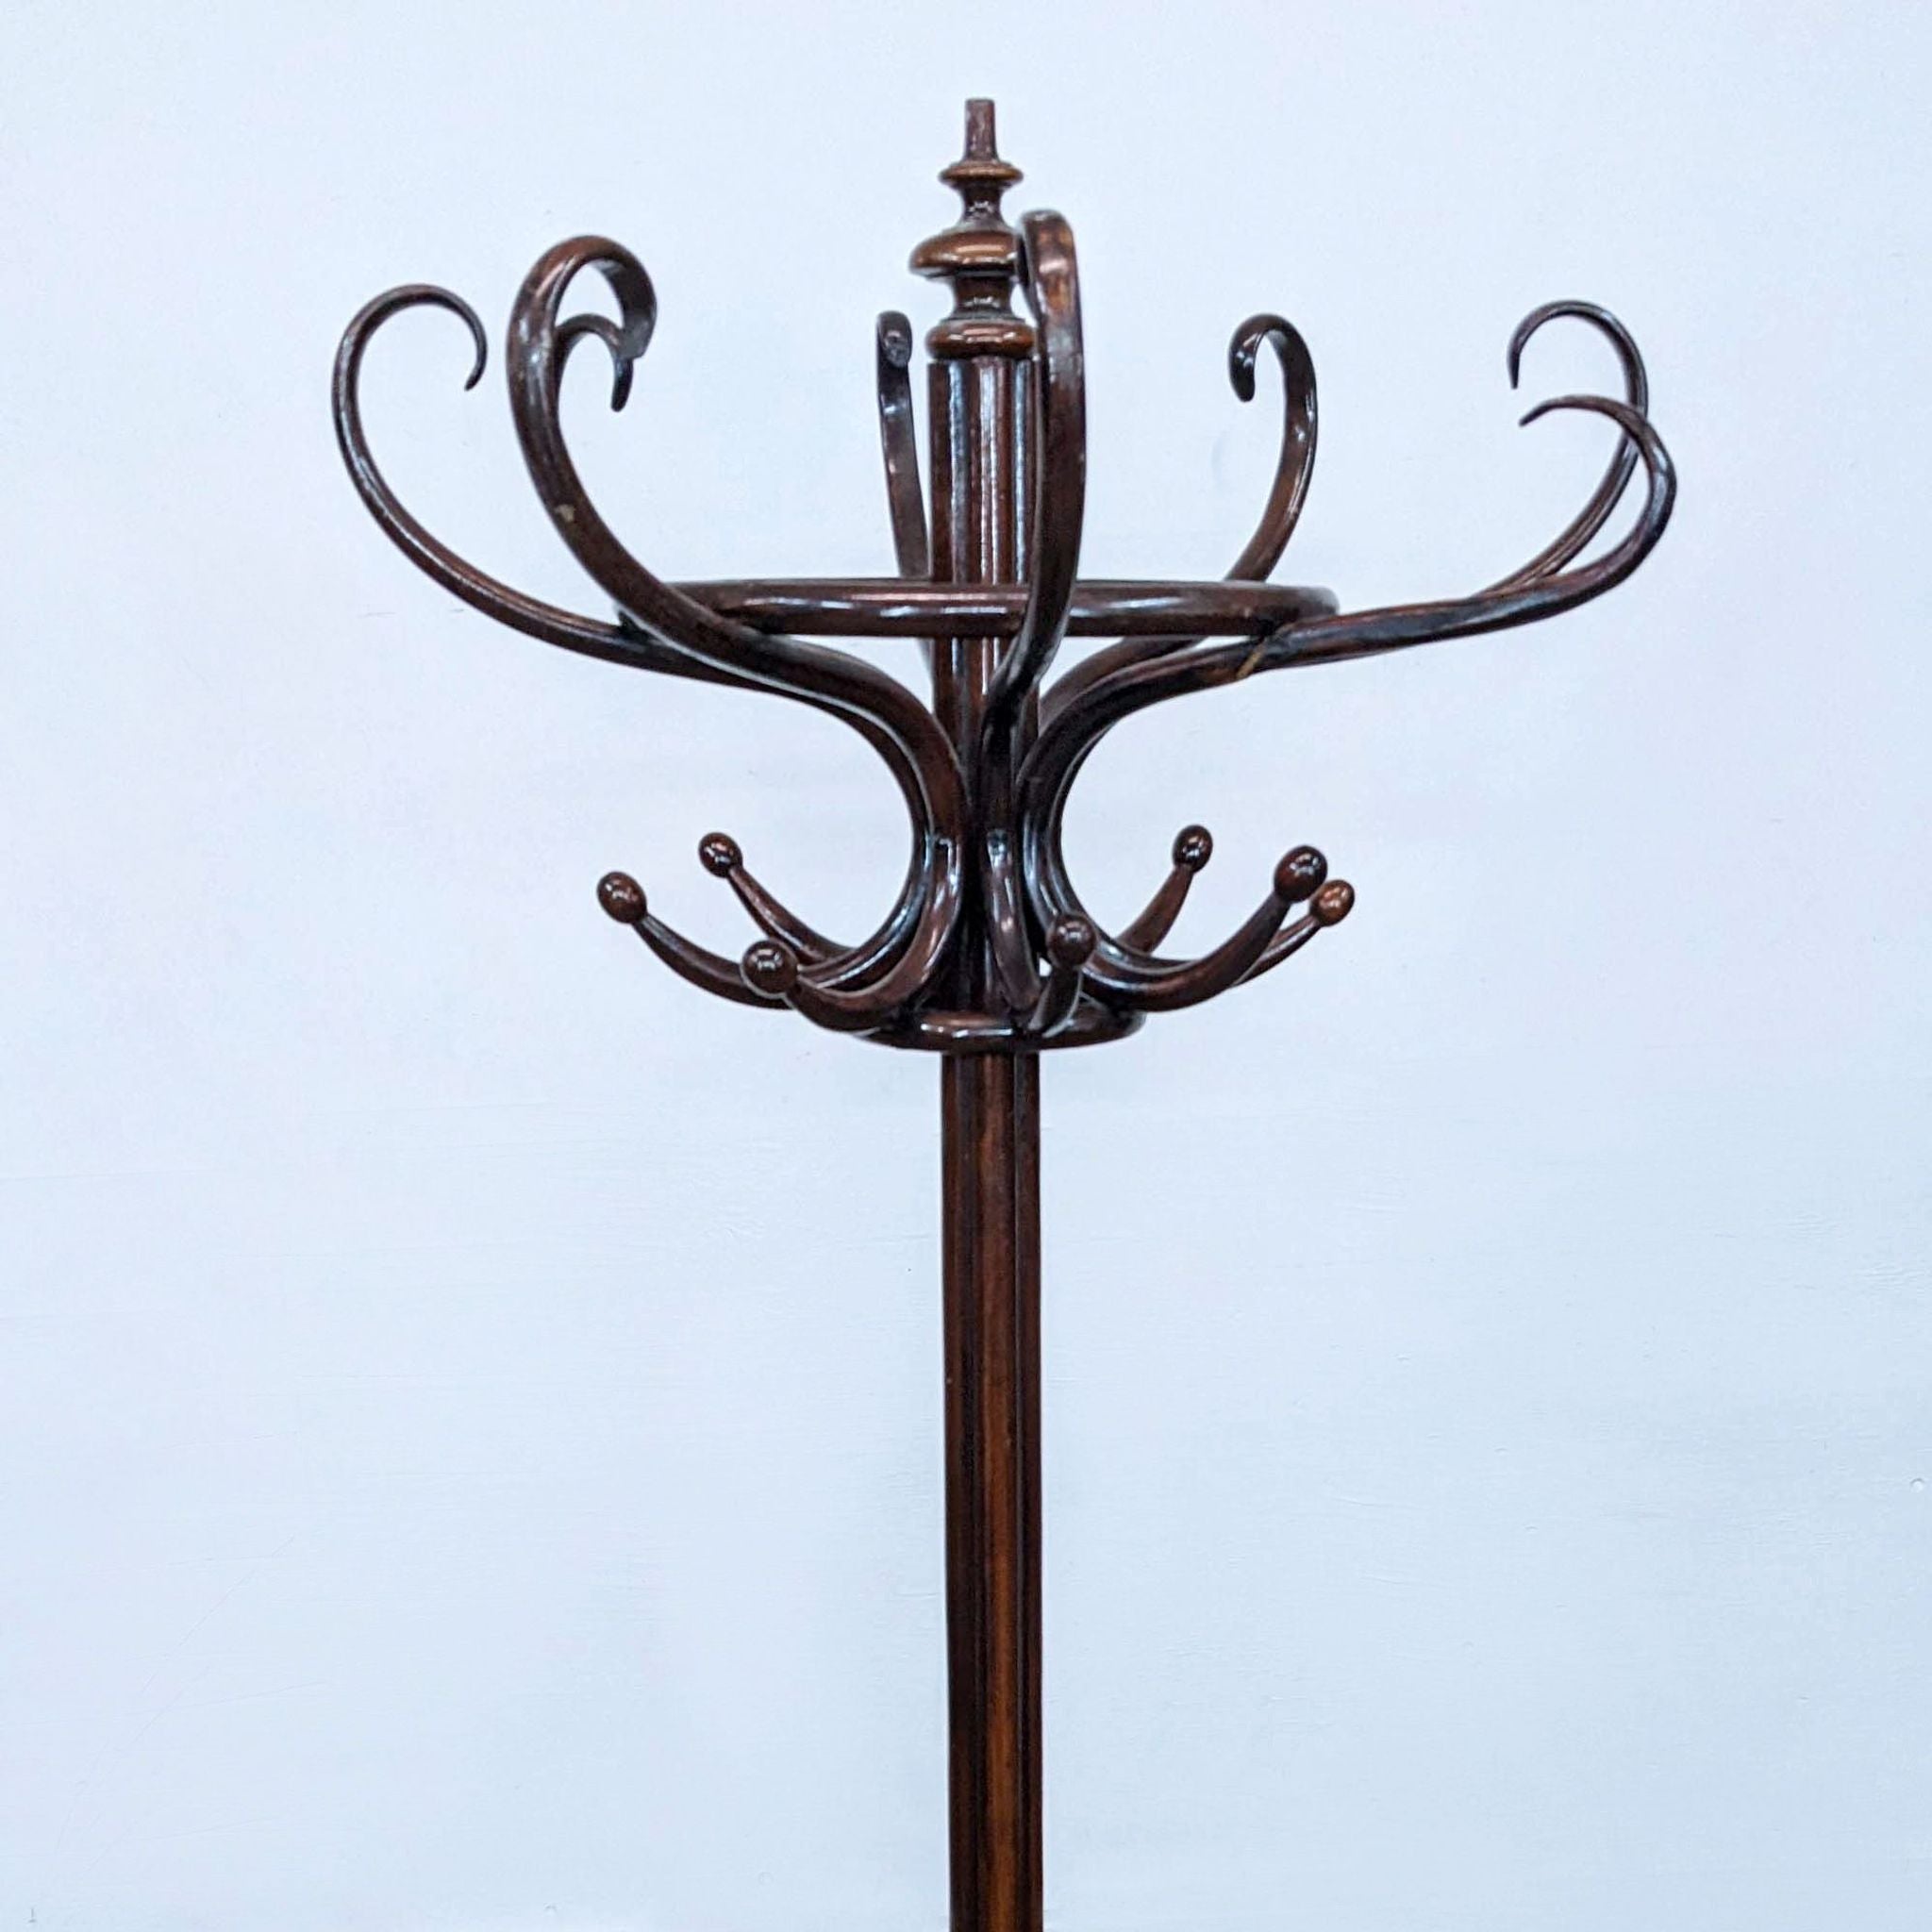 Alt text 2: Close-up of a Thonet wooden coat rack showcasing the bent wood design and craftsmanship, with a focus on the curved legs and S hooks.